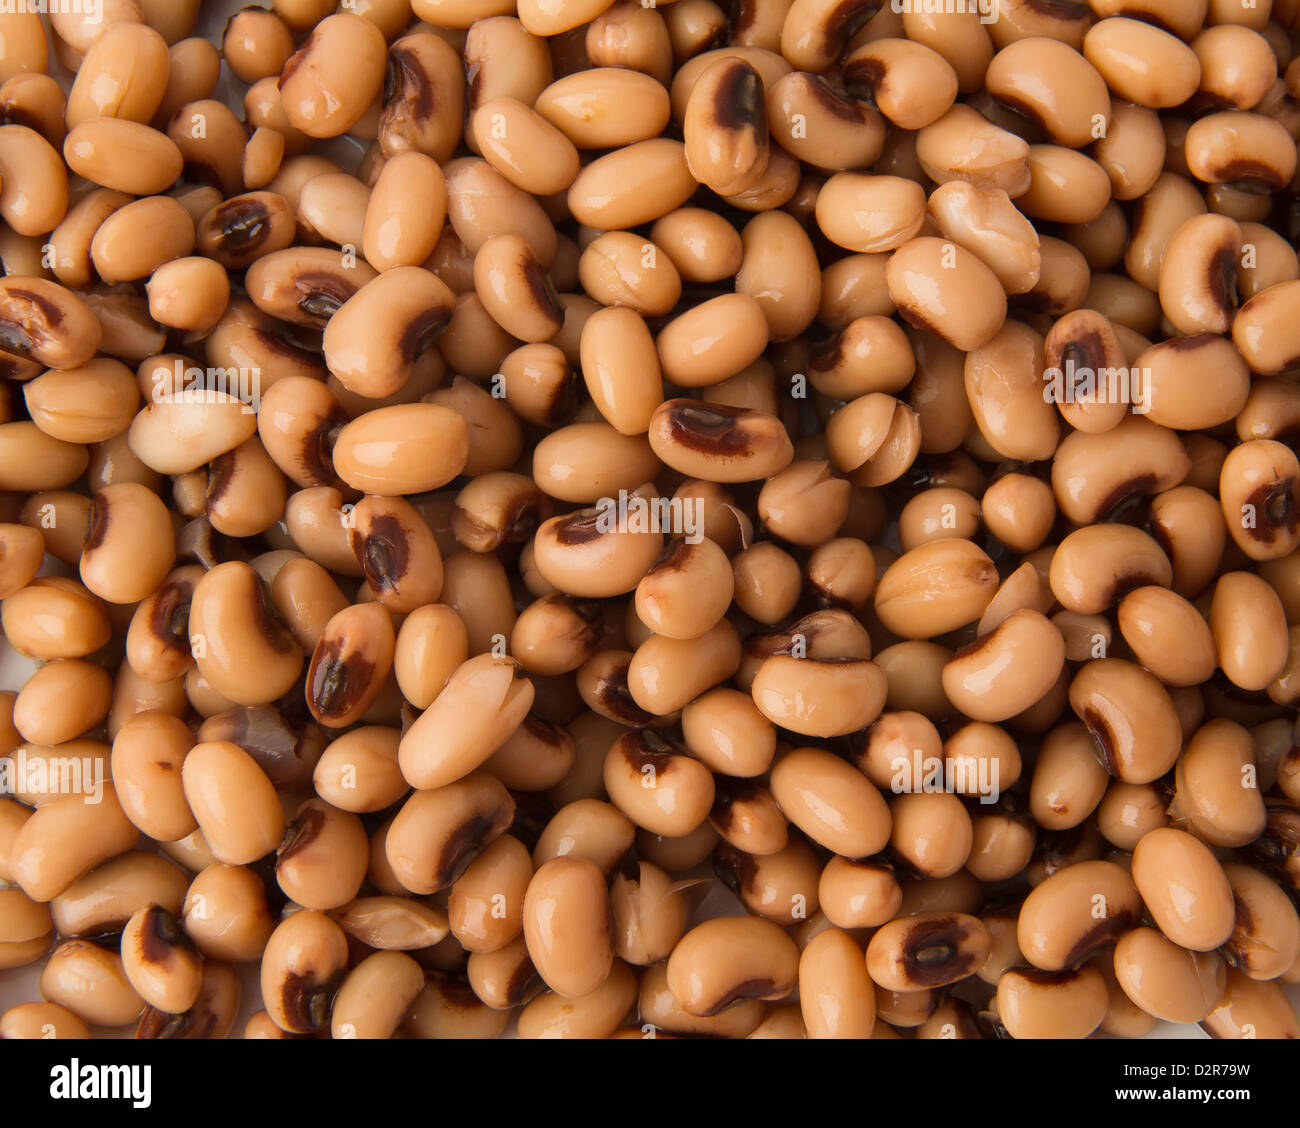 "Oscurati eyed beans Foto Stock